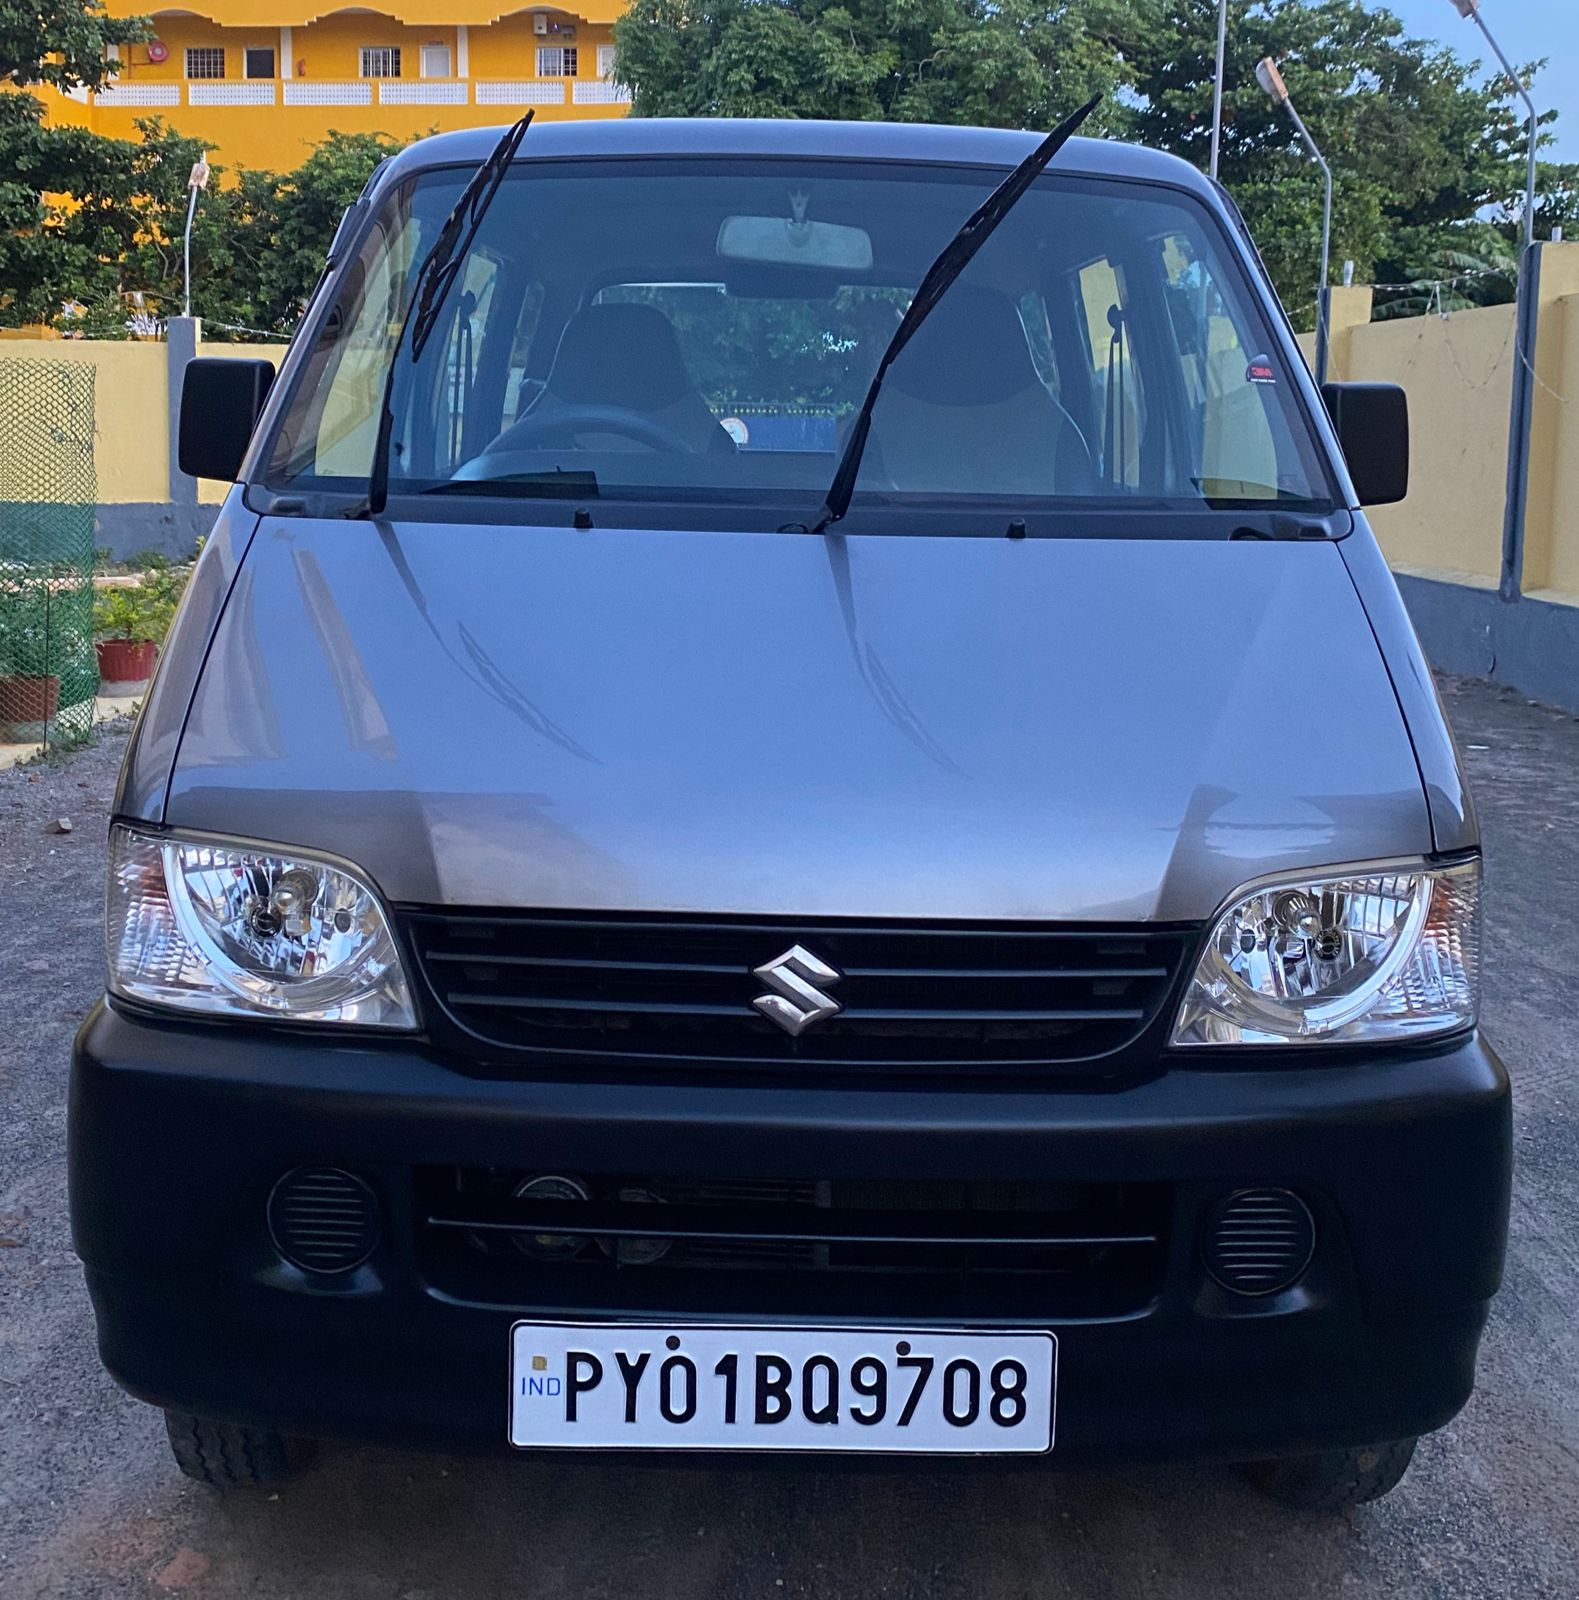 3664-for-sale-Maruthi-Suzuki-Eeco-Petrol-First-Owner-2012-PY-registered-rs-264998